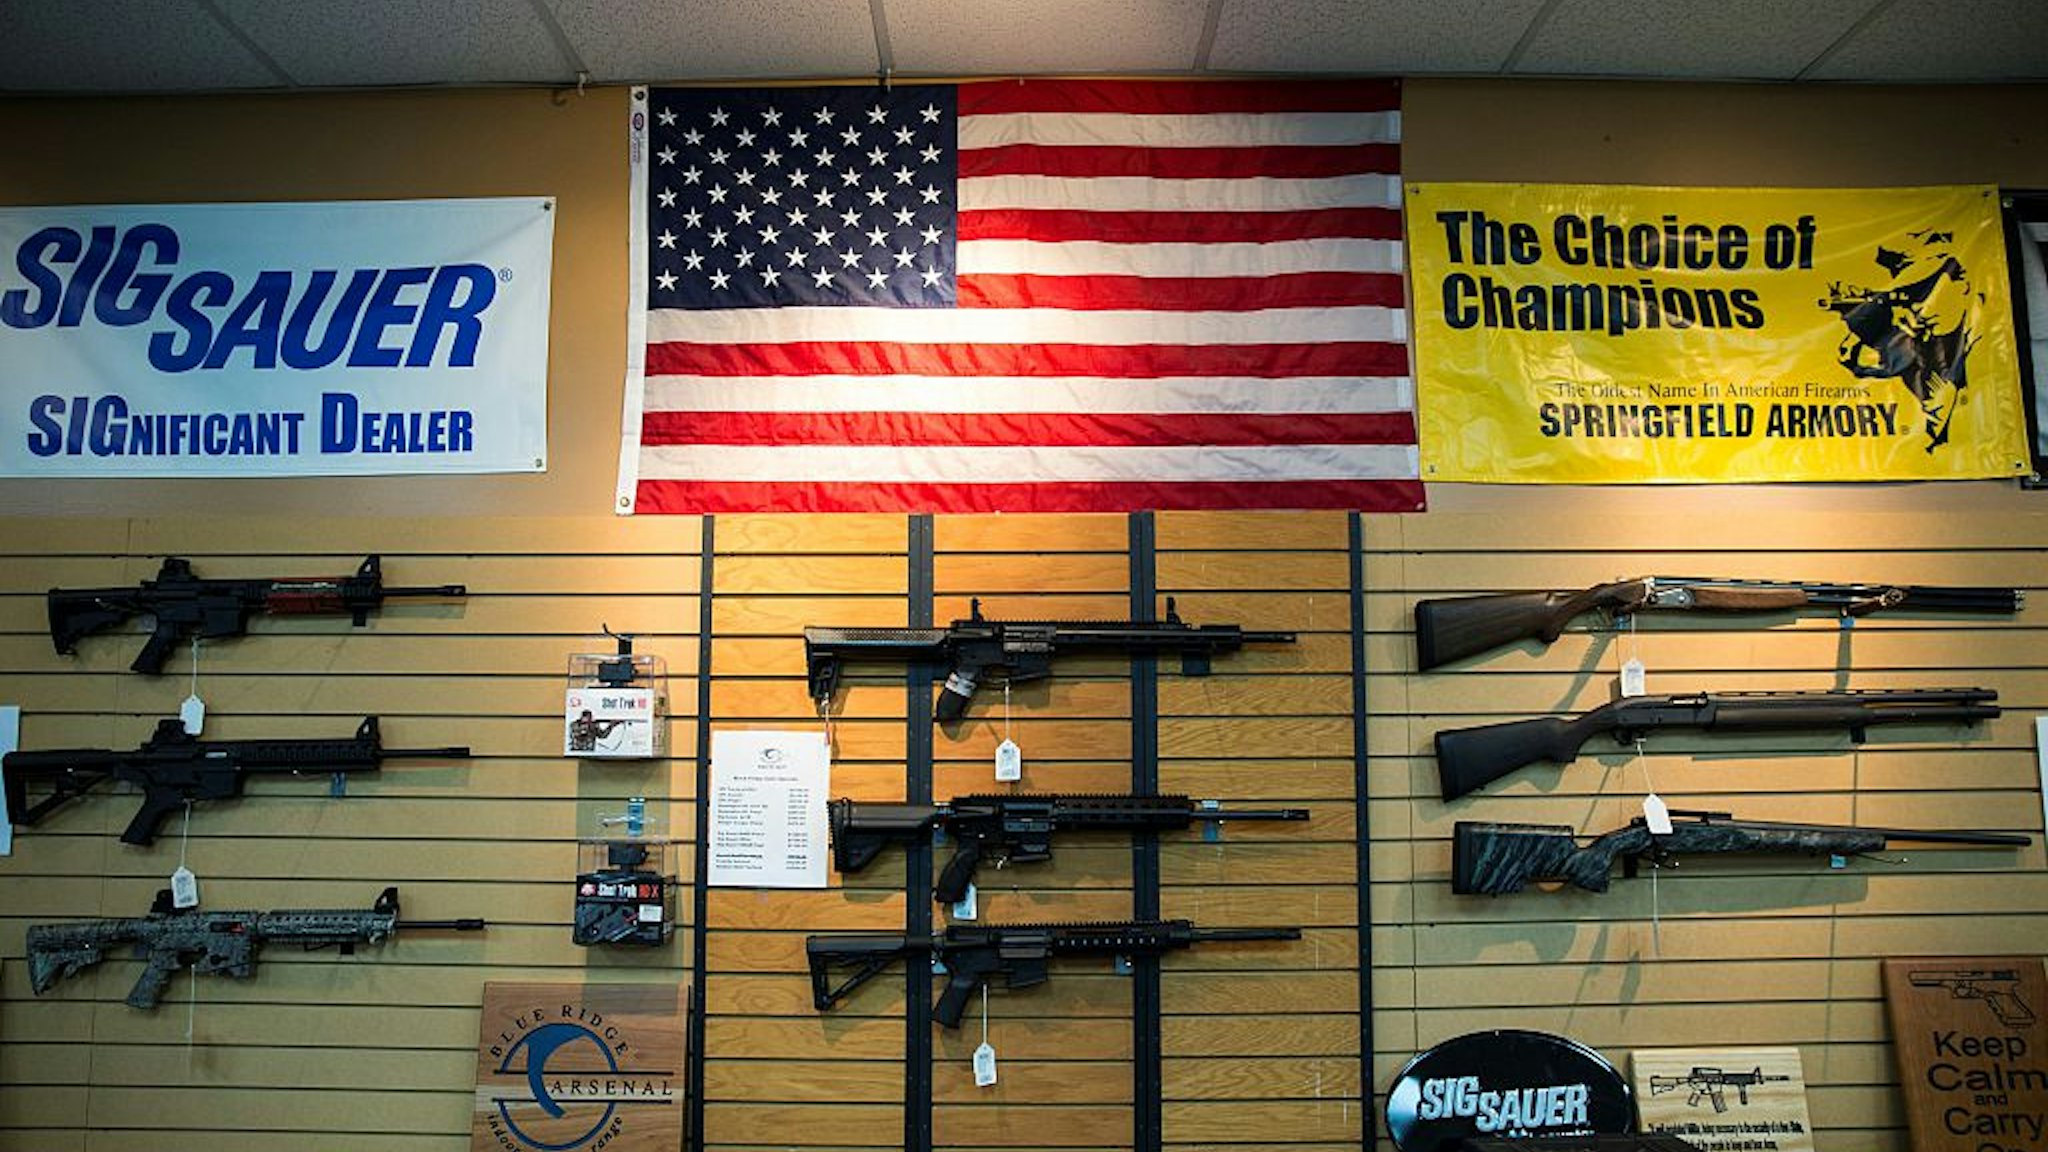 AR-15 style rifles and shotguns for sale at Blue Ridge Arsenal in Chantilly, Va., USA on January 9, 2015.